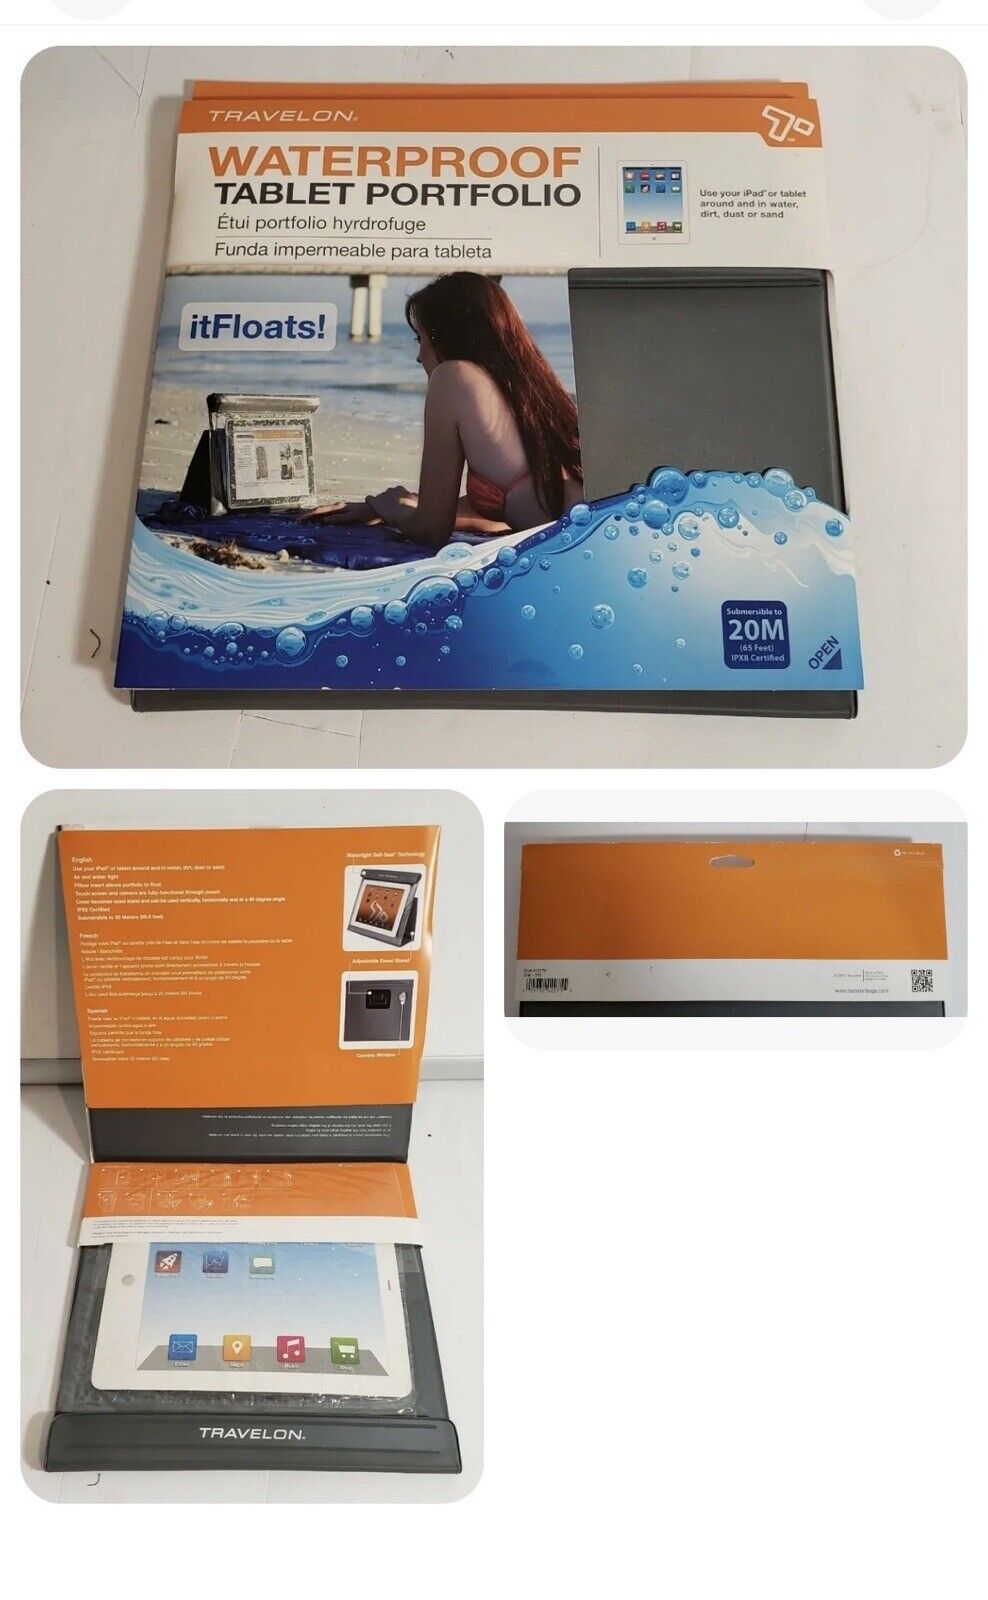 Travelon Waterproof Table Portfolio for Ipad Tablet Protect Baech Pool Boat New